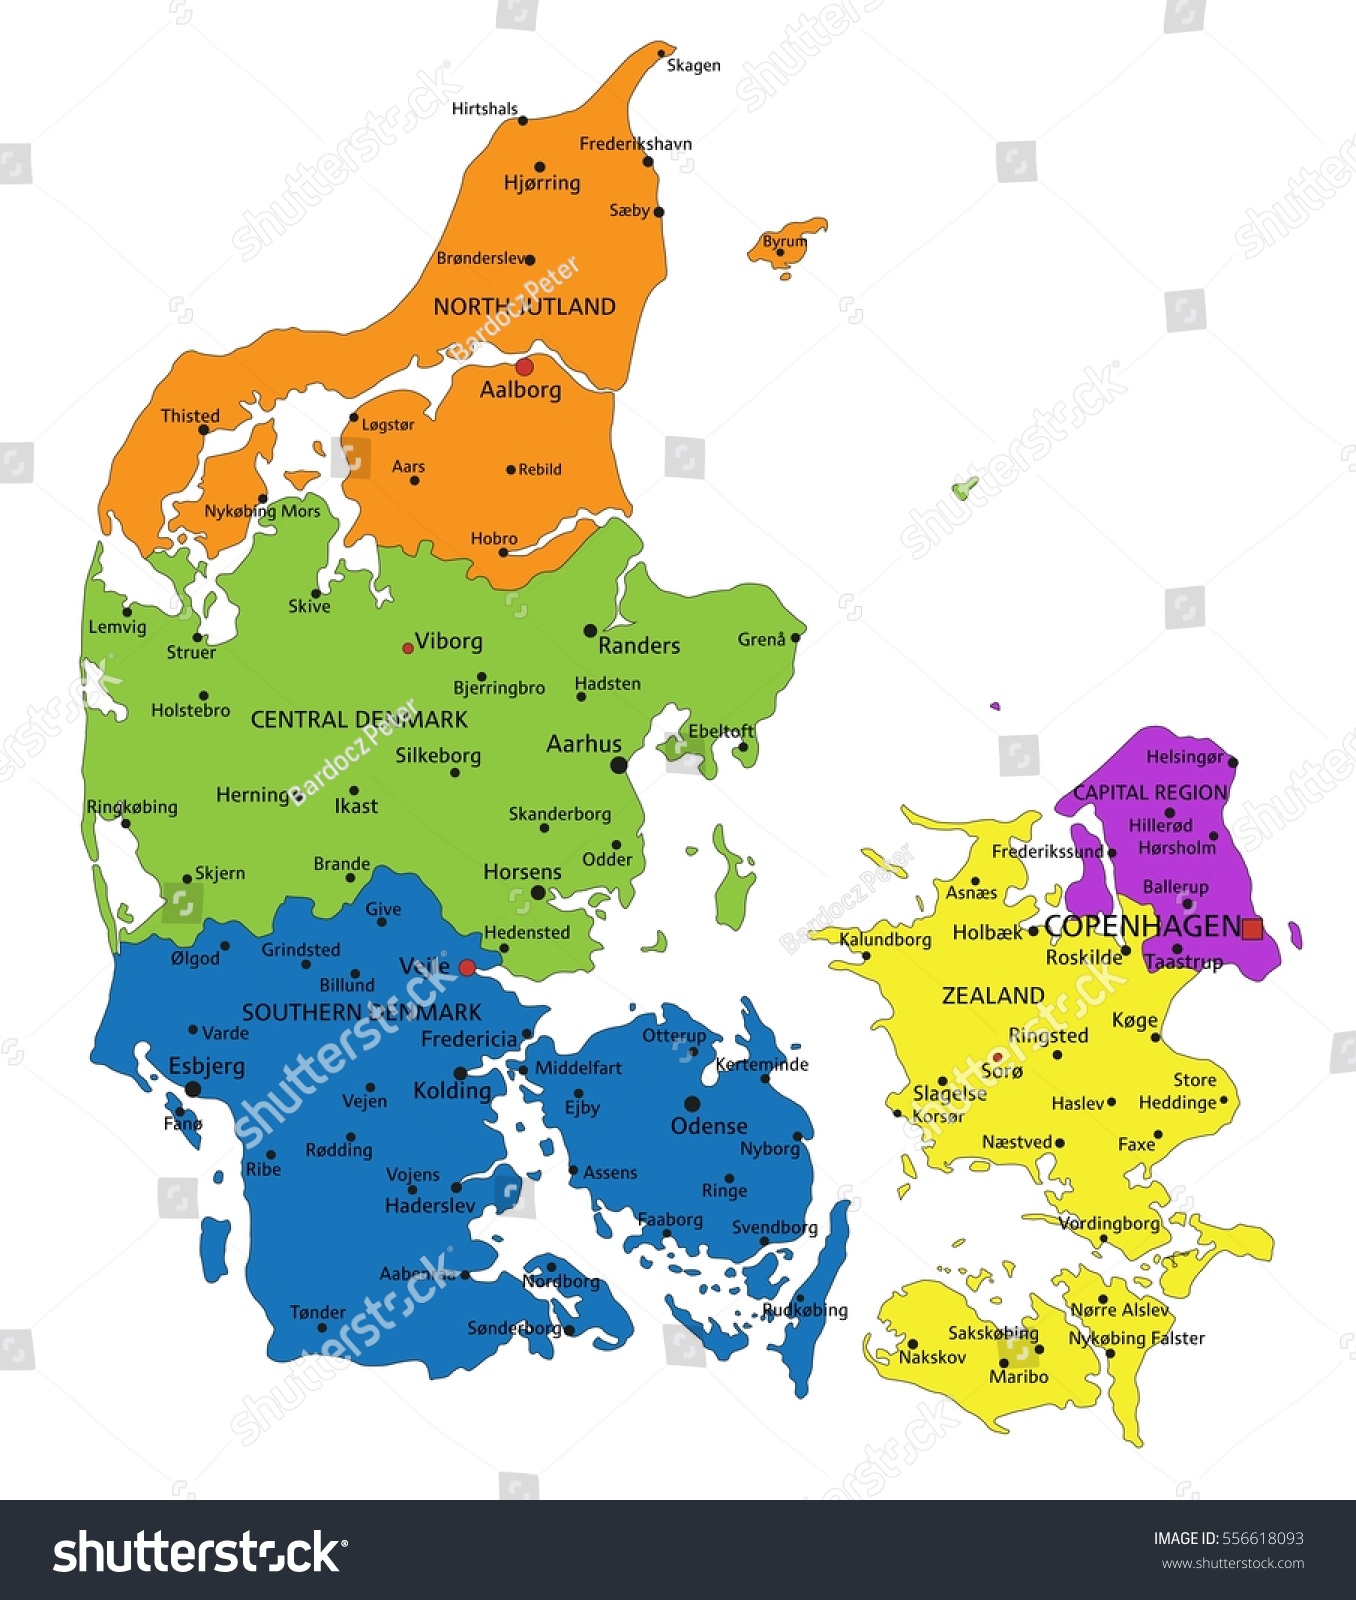 Colorful Denmark Political Map With Clearly Labeled S - vrogue.co